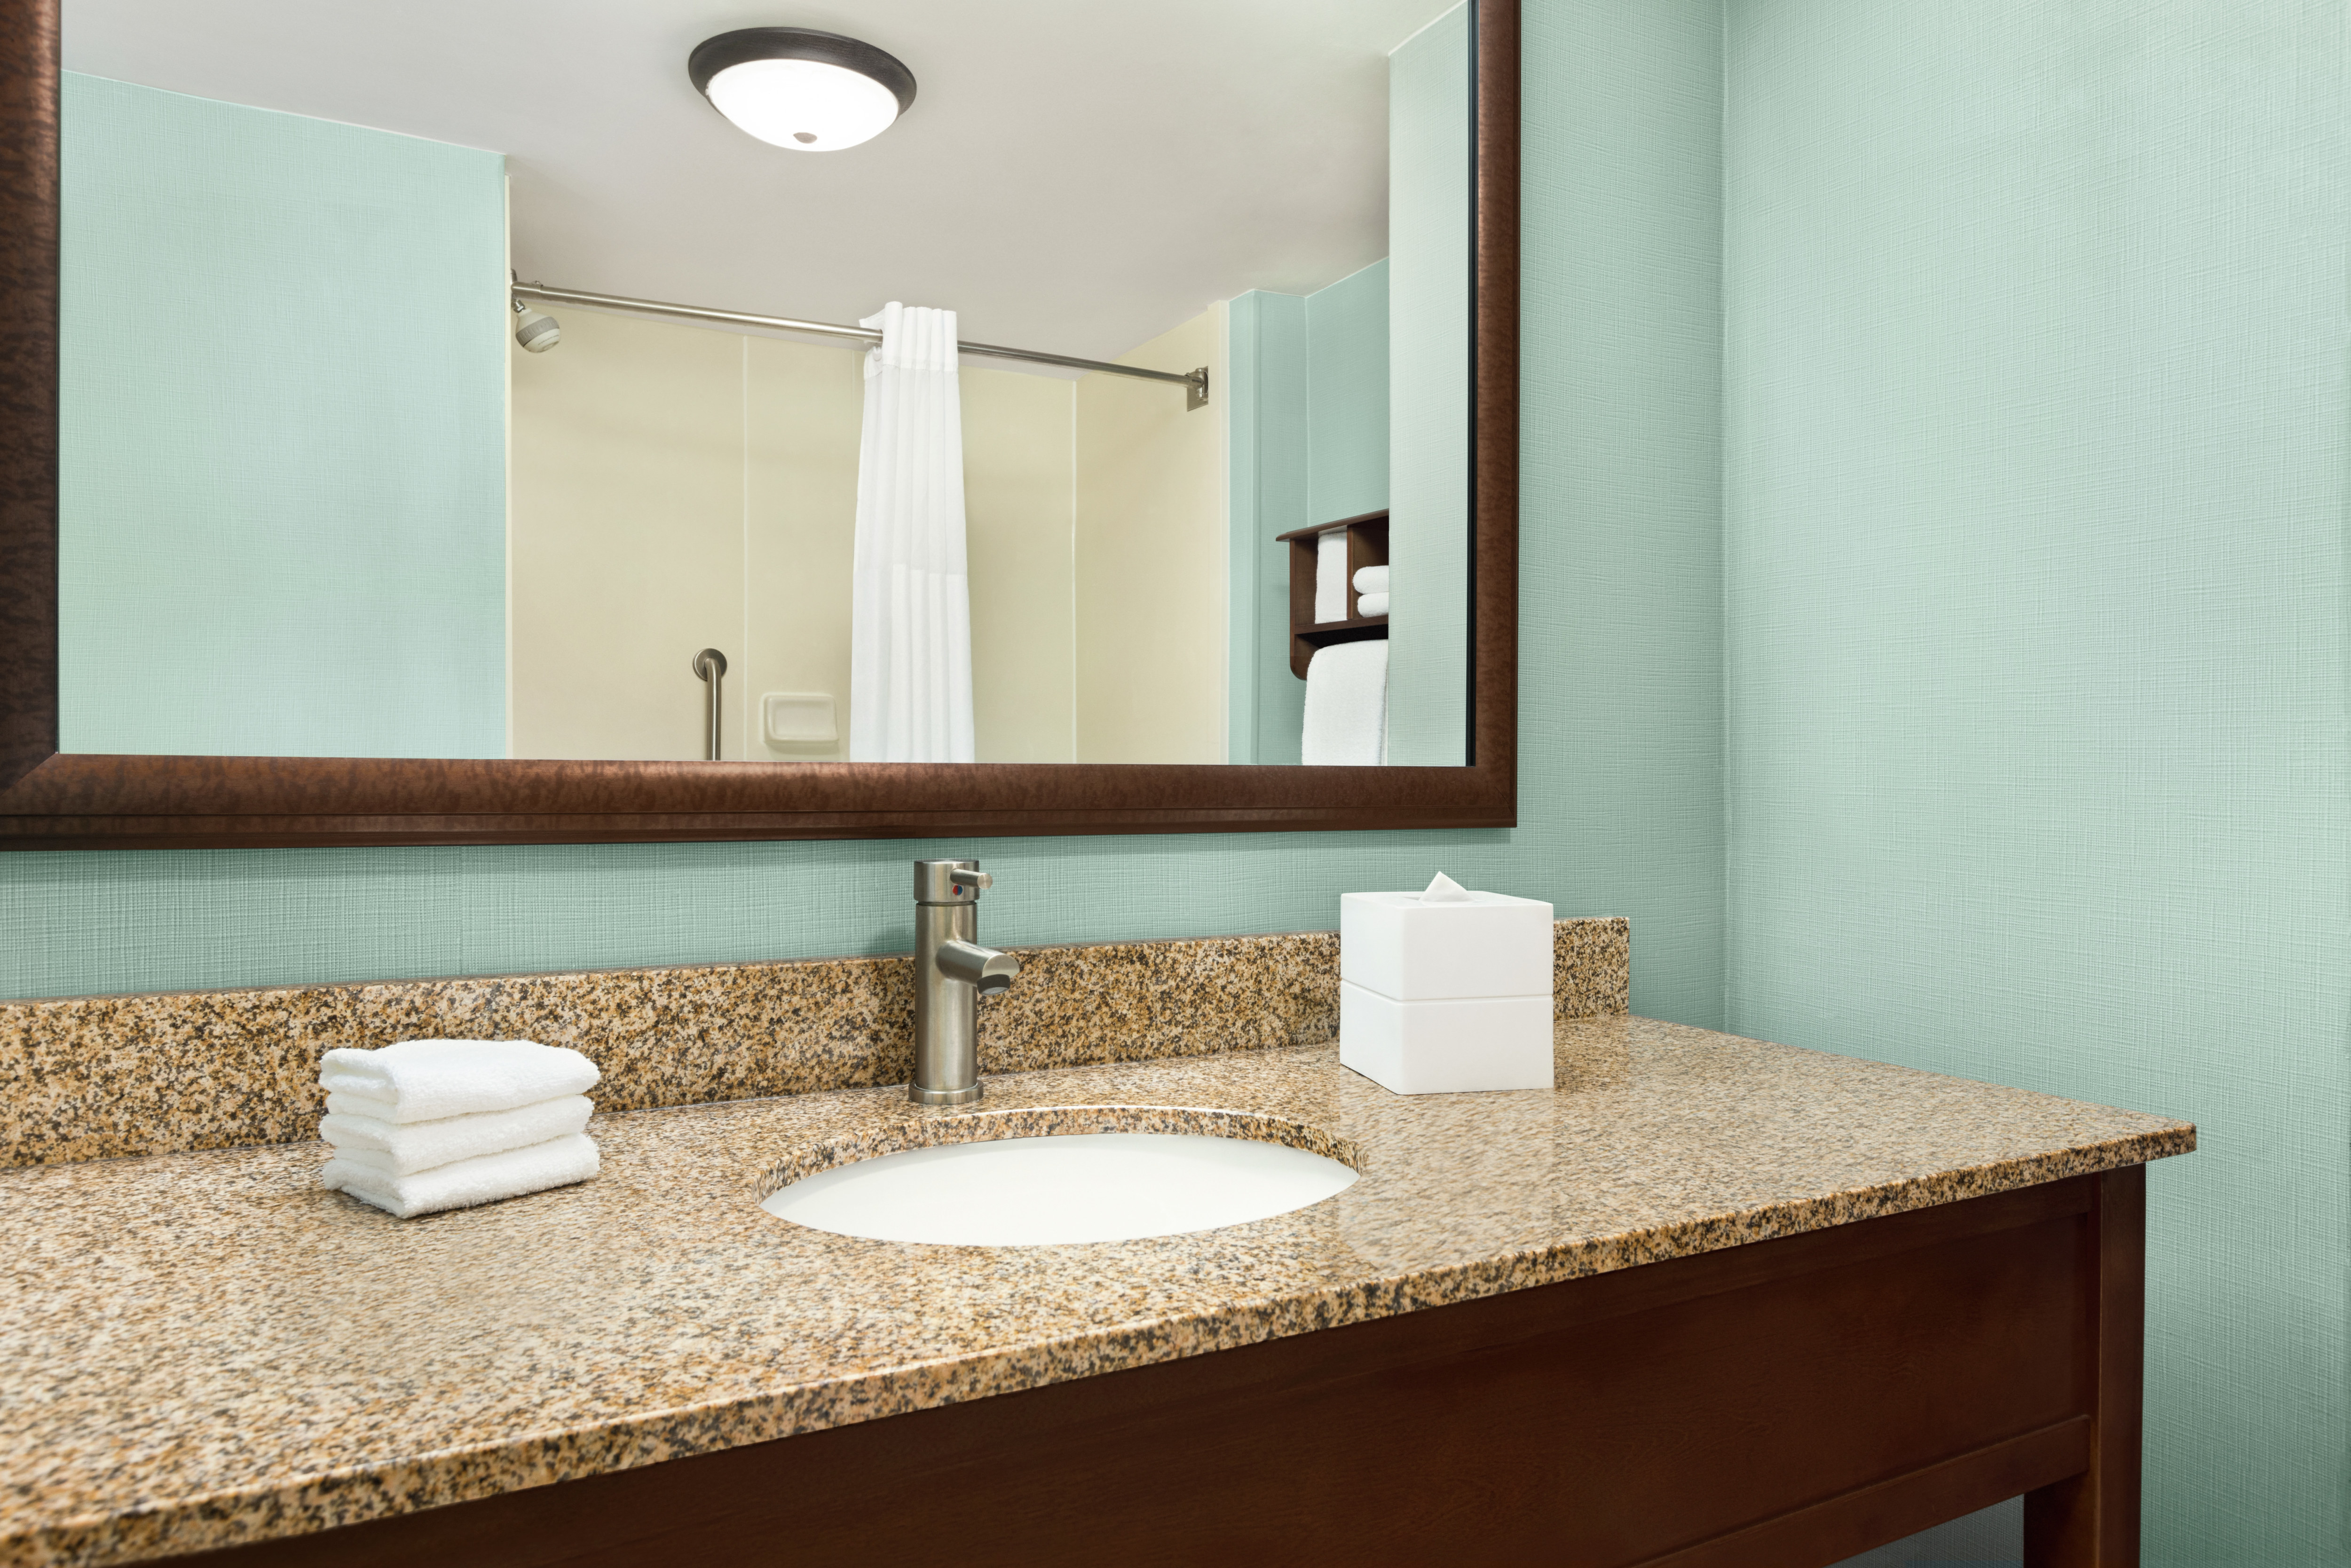 Spacious guest bathroom featuring large vanity, mirror, and tub with shower.